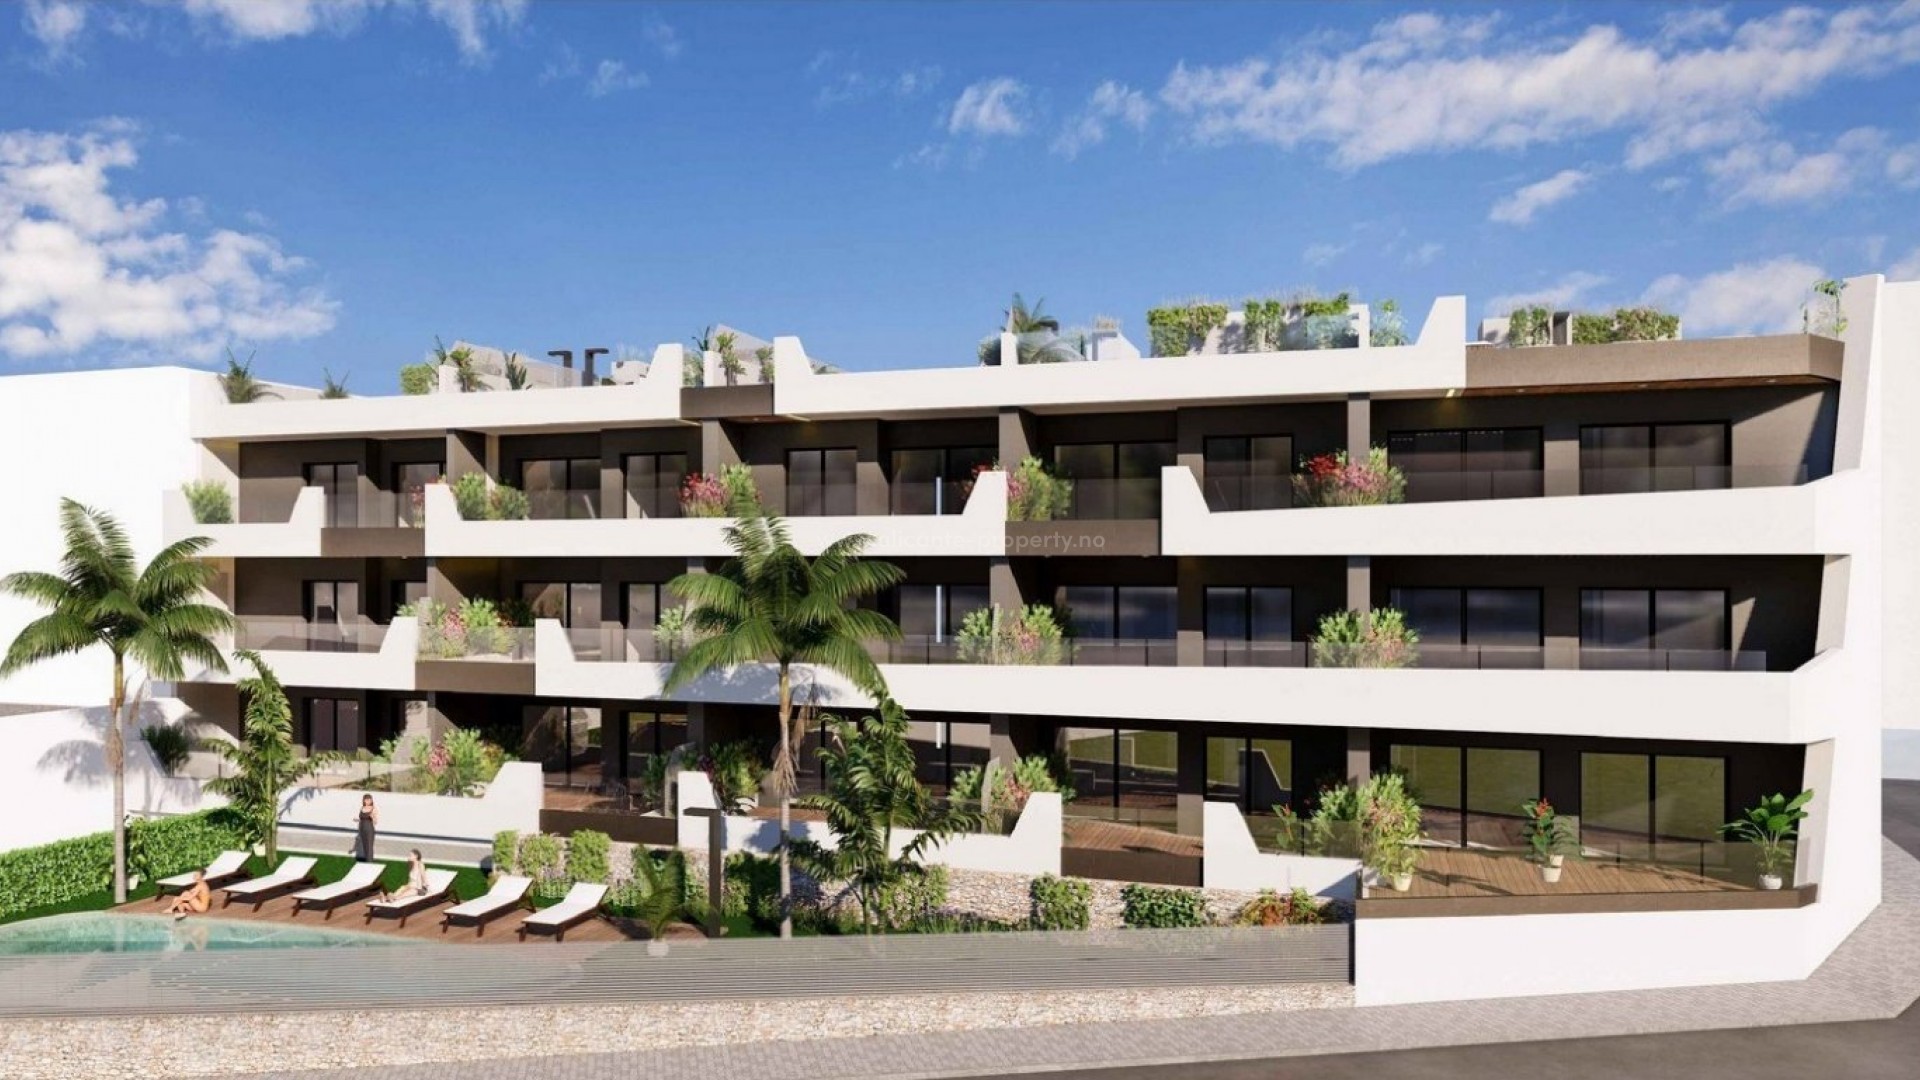 New apartments in Benijofar, Alicante, 2/3 bedrooms and 2 bathrooms, green area w/swimming pool. Several golf courses nearby. 10 min to beaches